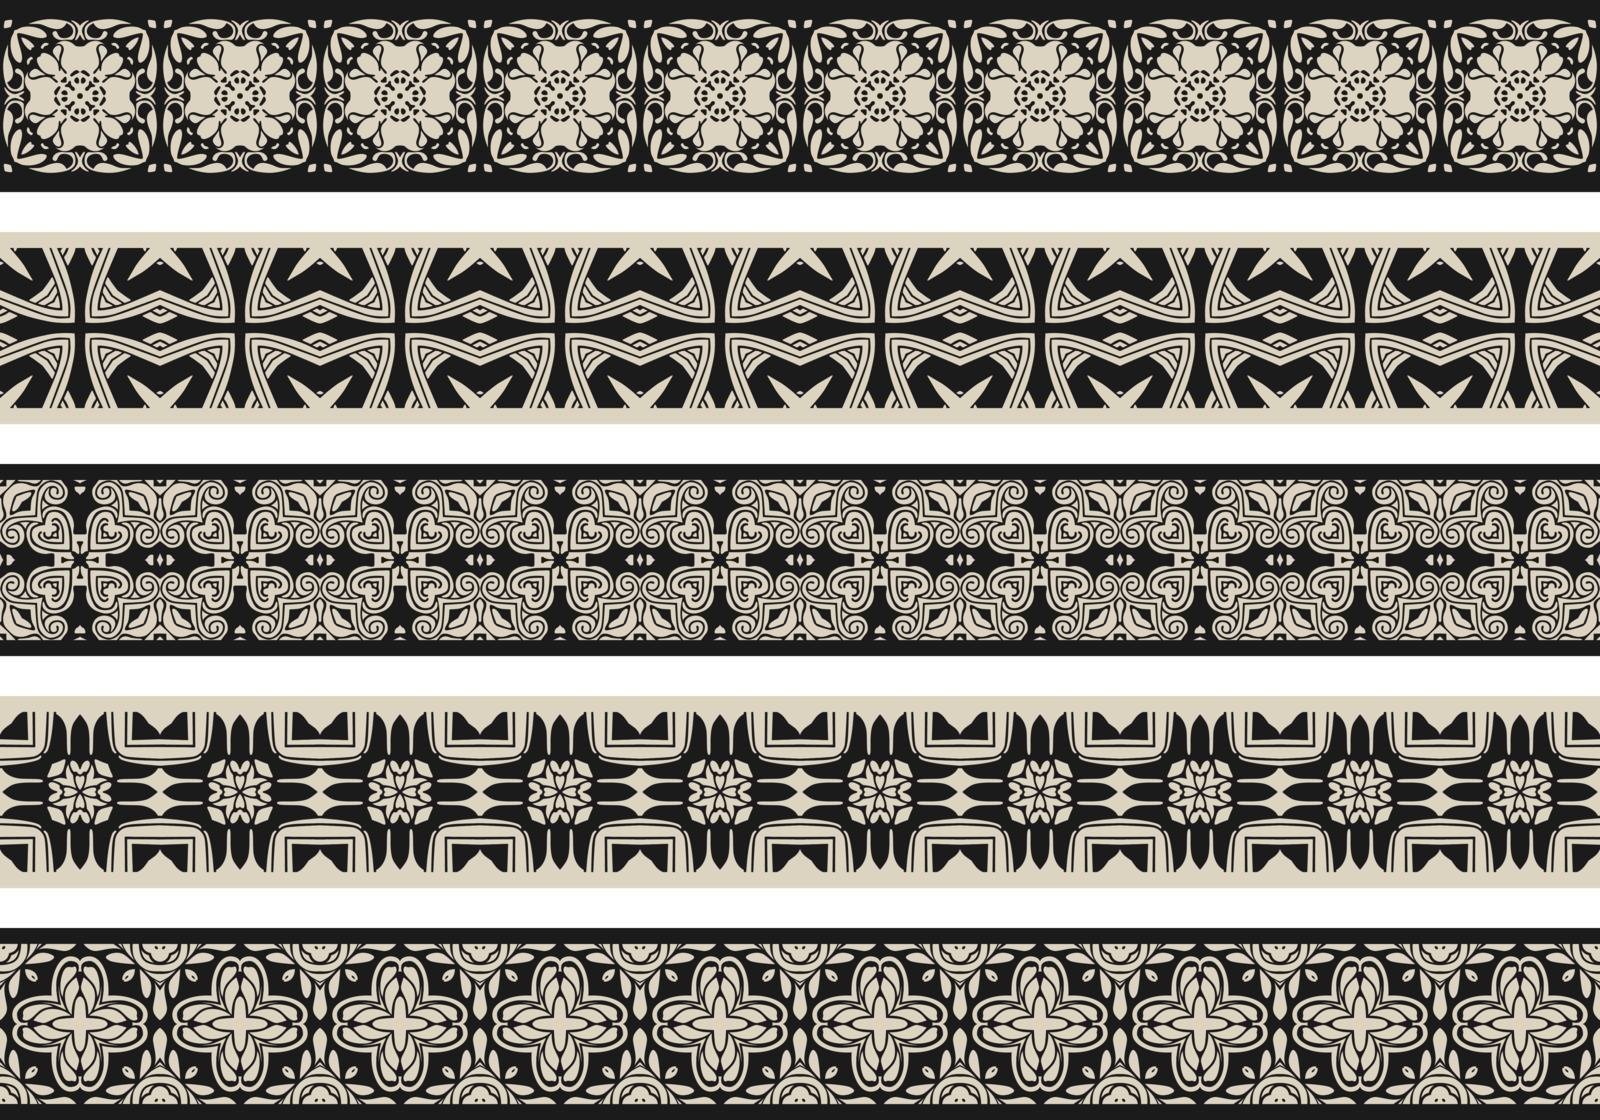 Set of five illustrated decorative borders made of abstract elements in beige and black